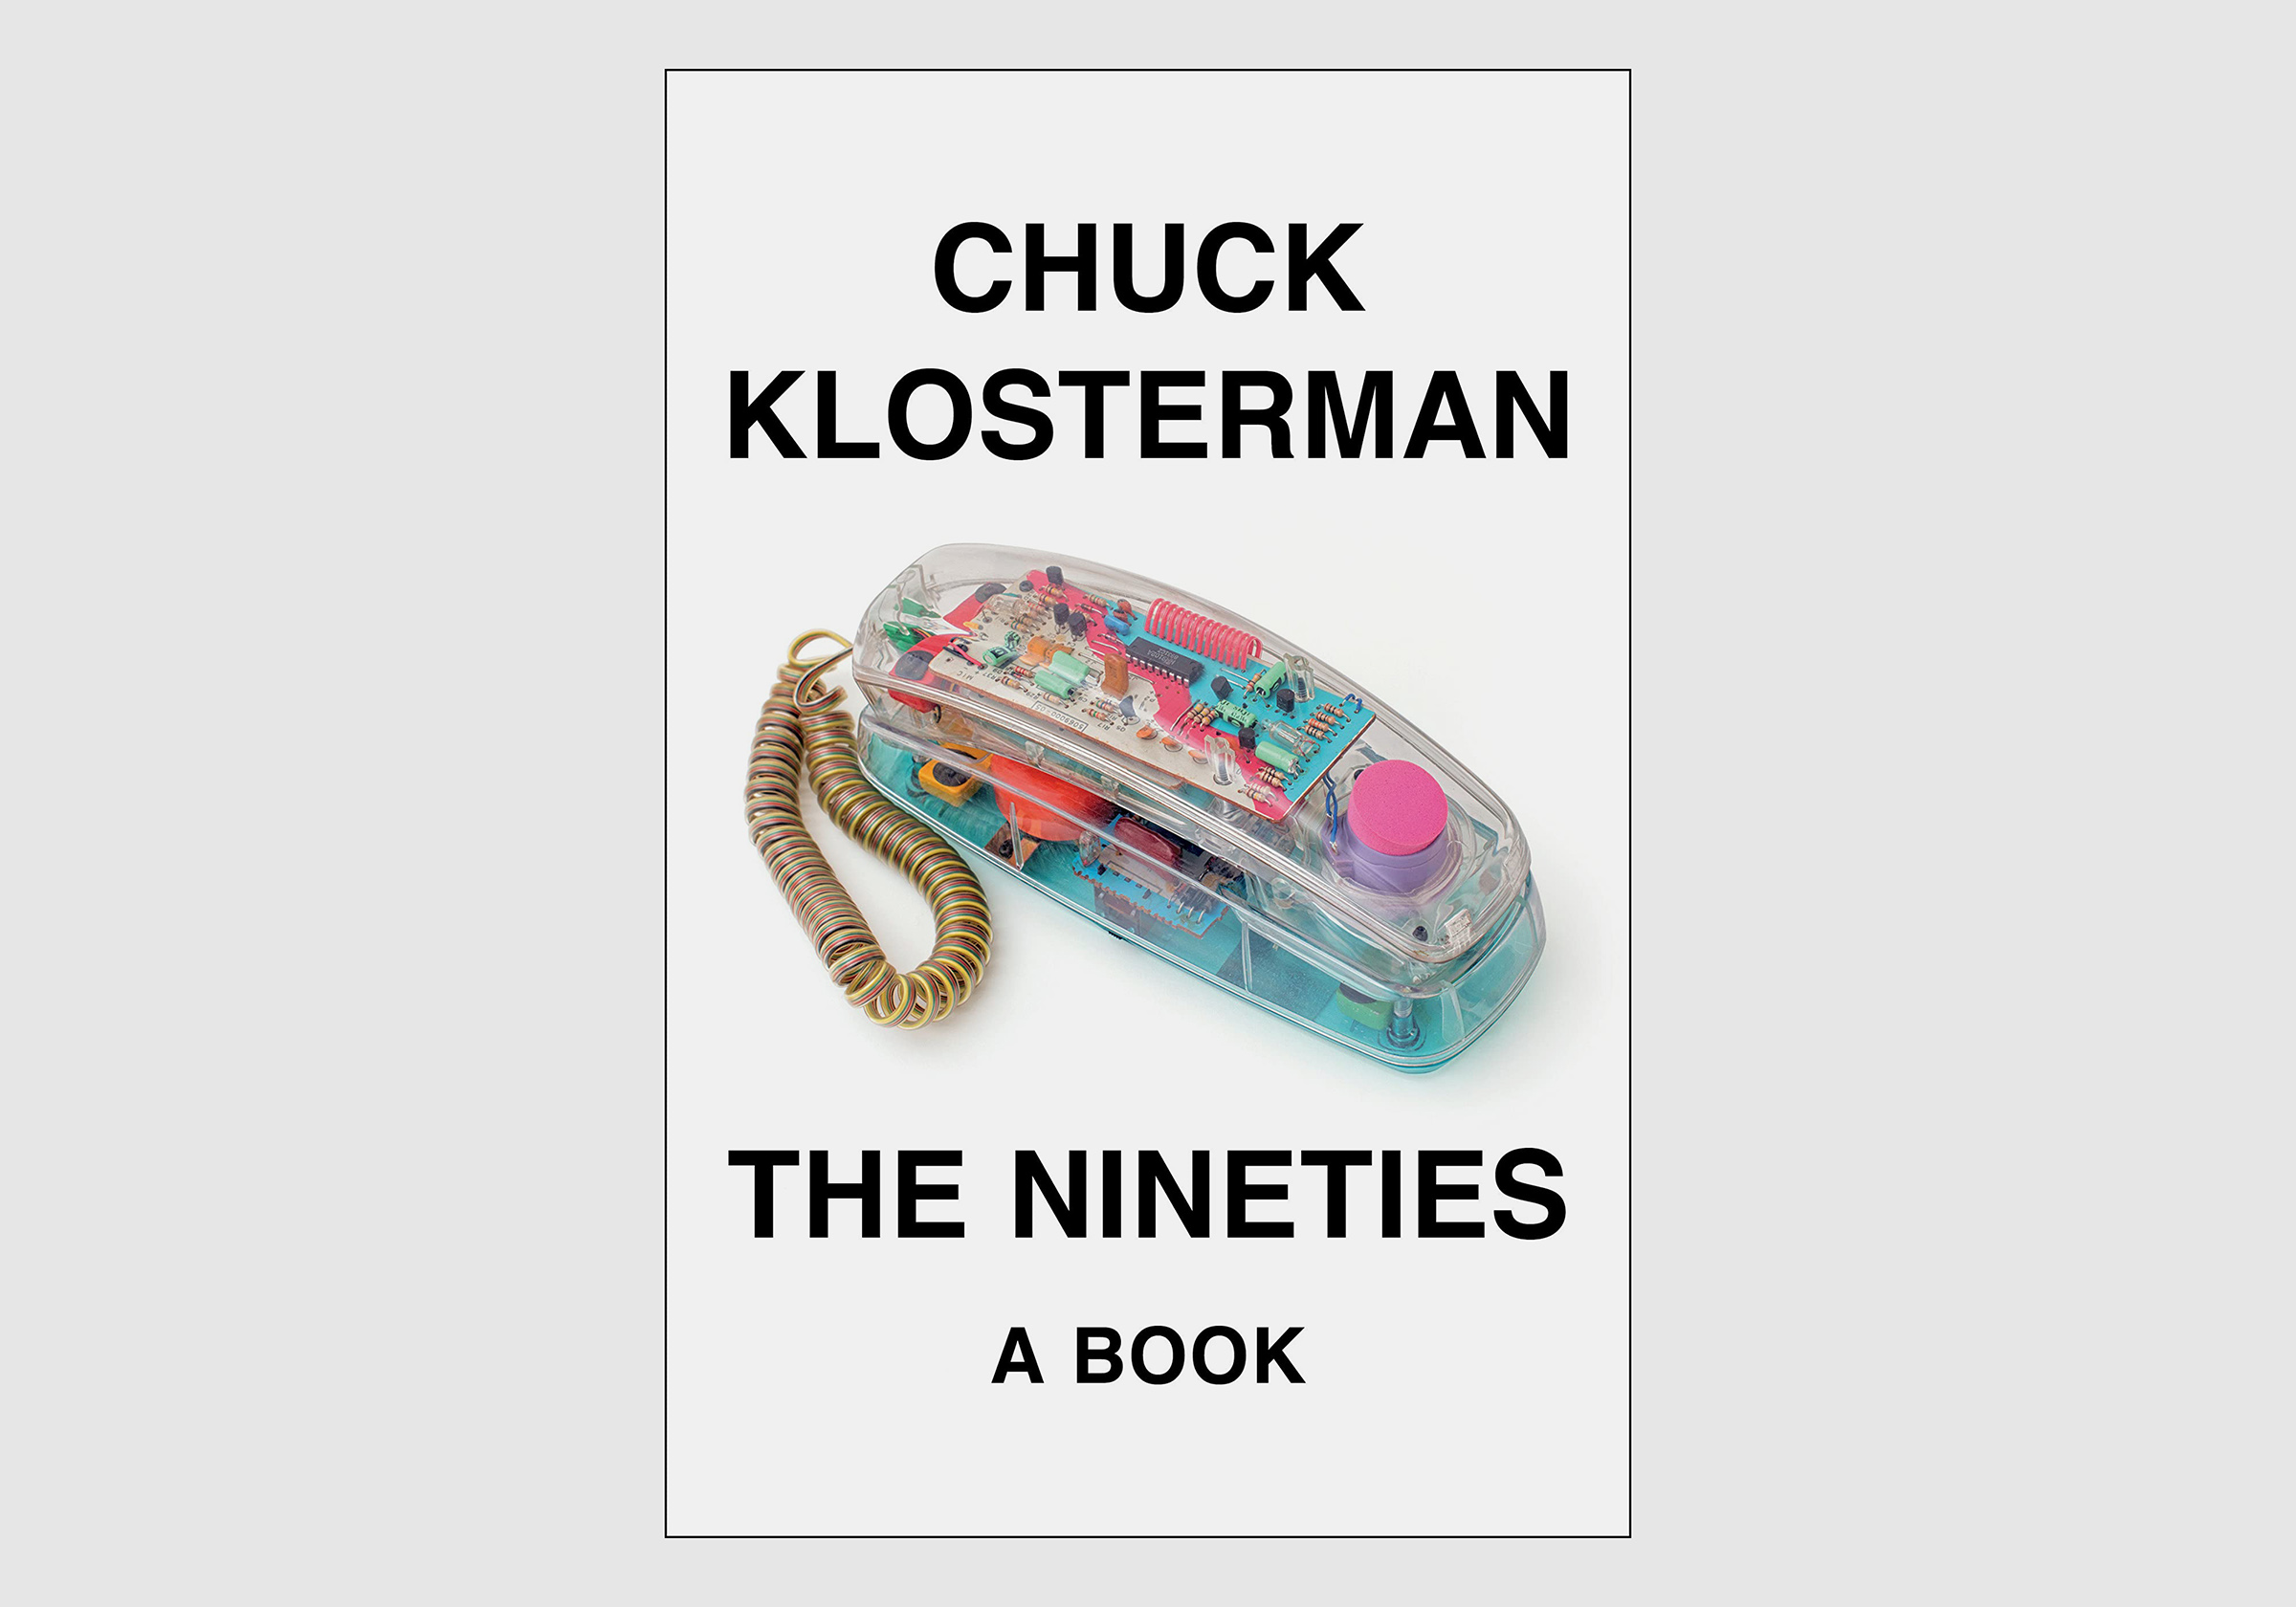 The cover of The Nineties by Chuck Klosterman